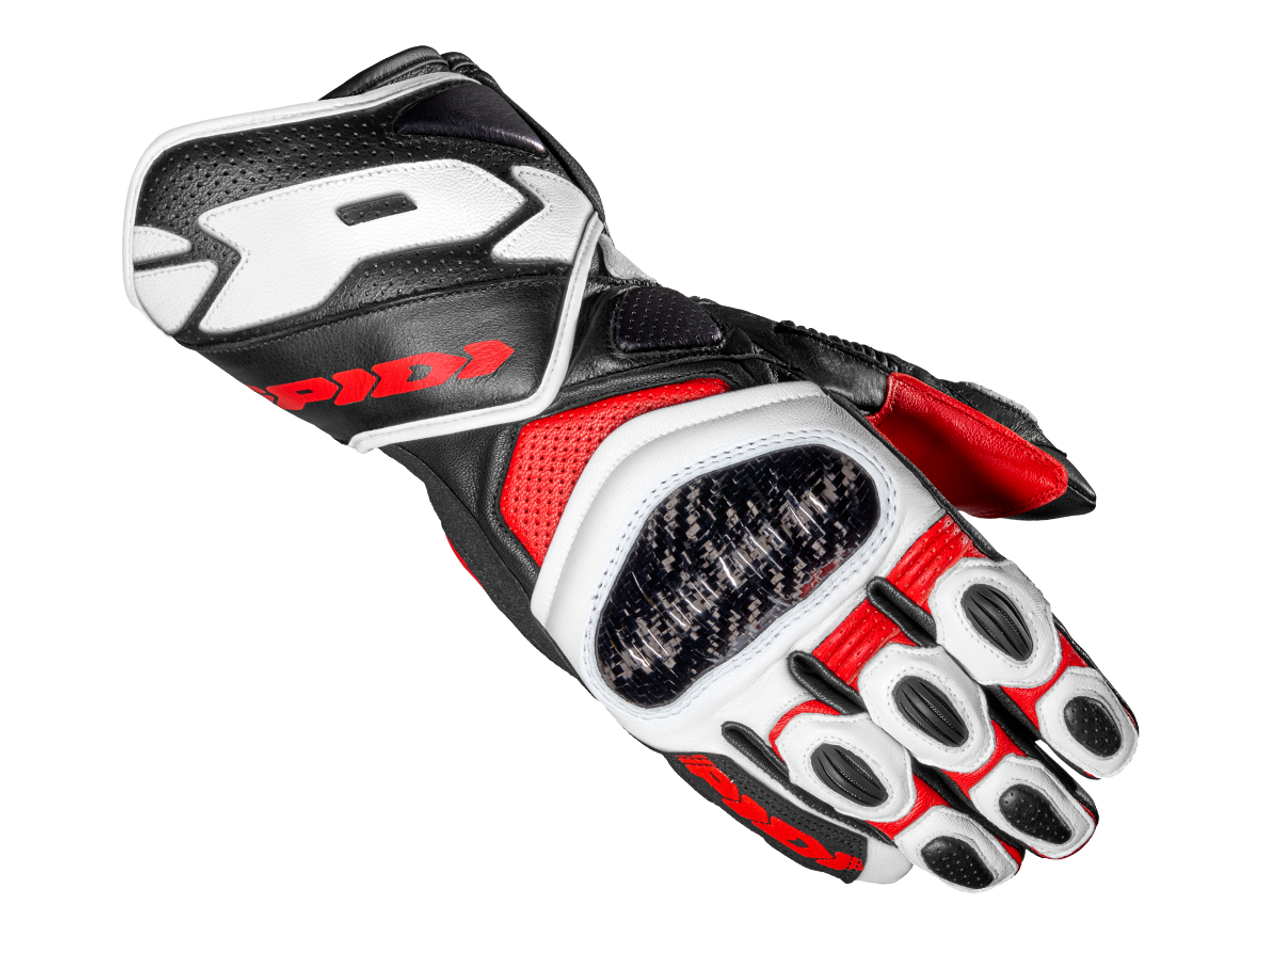 SPIDI Carbo 7 Motorcycle Gloves Red: MOTO-D Racing